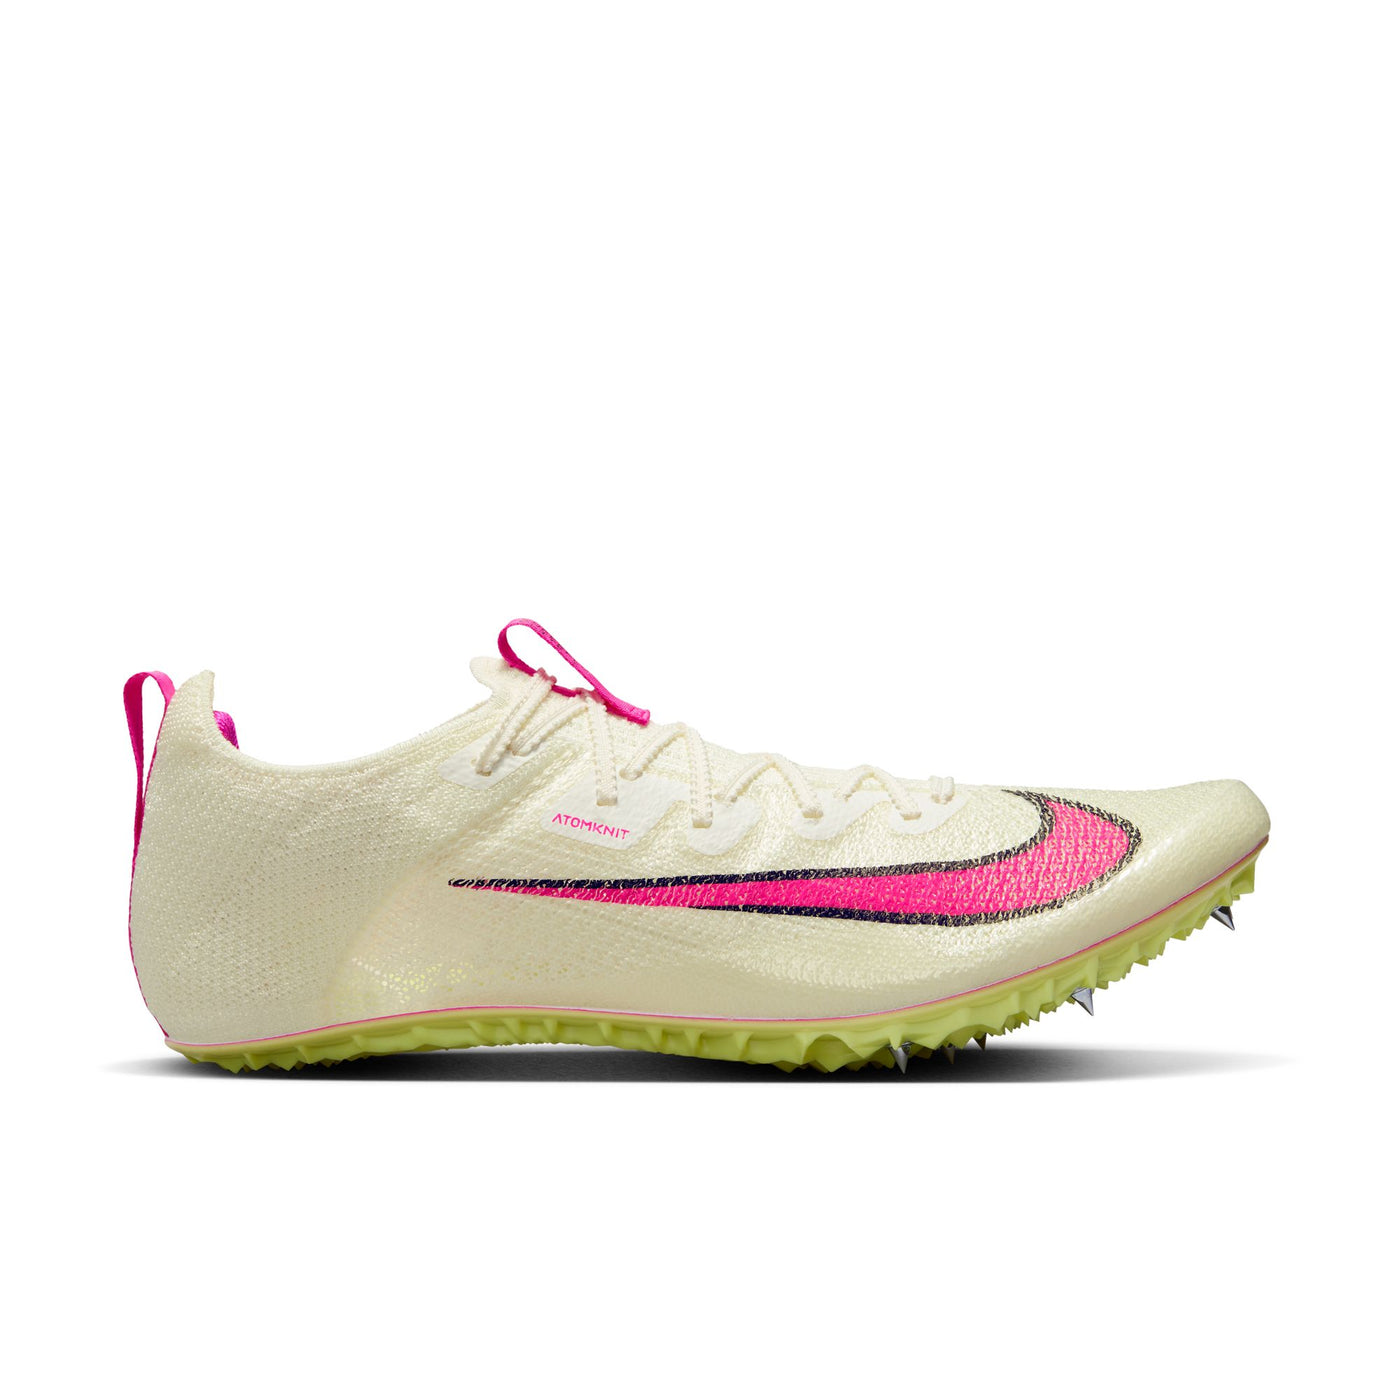 Nike Zoom Superfly Elite 2 - IN STORE ONLY